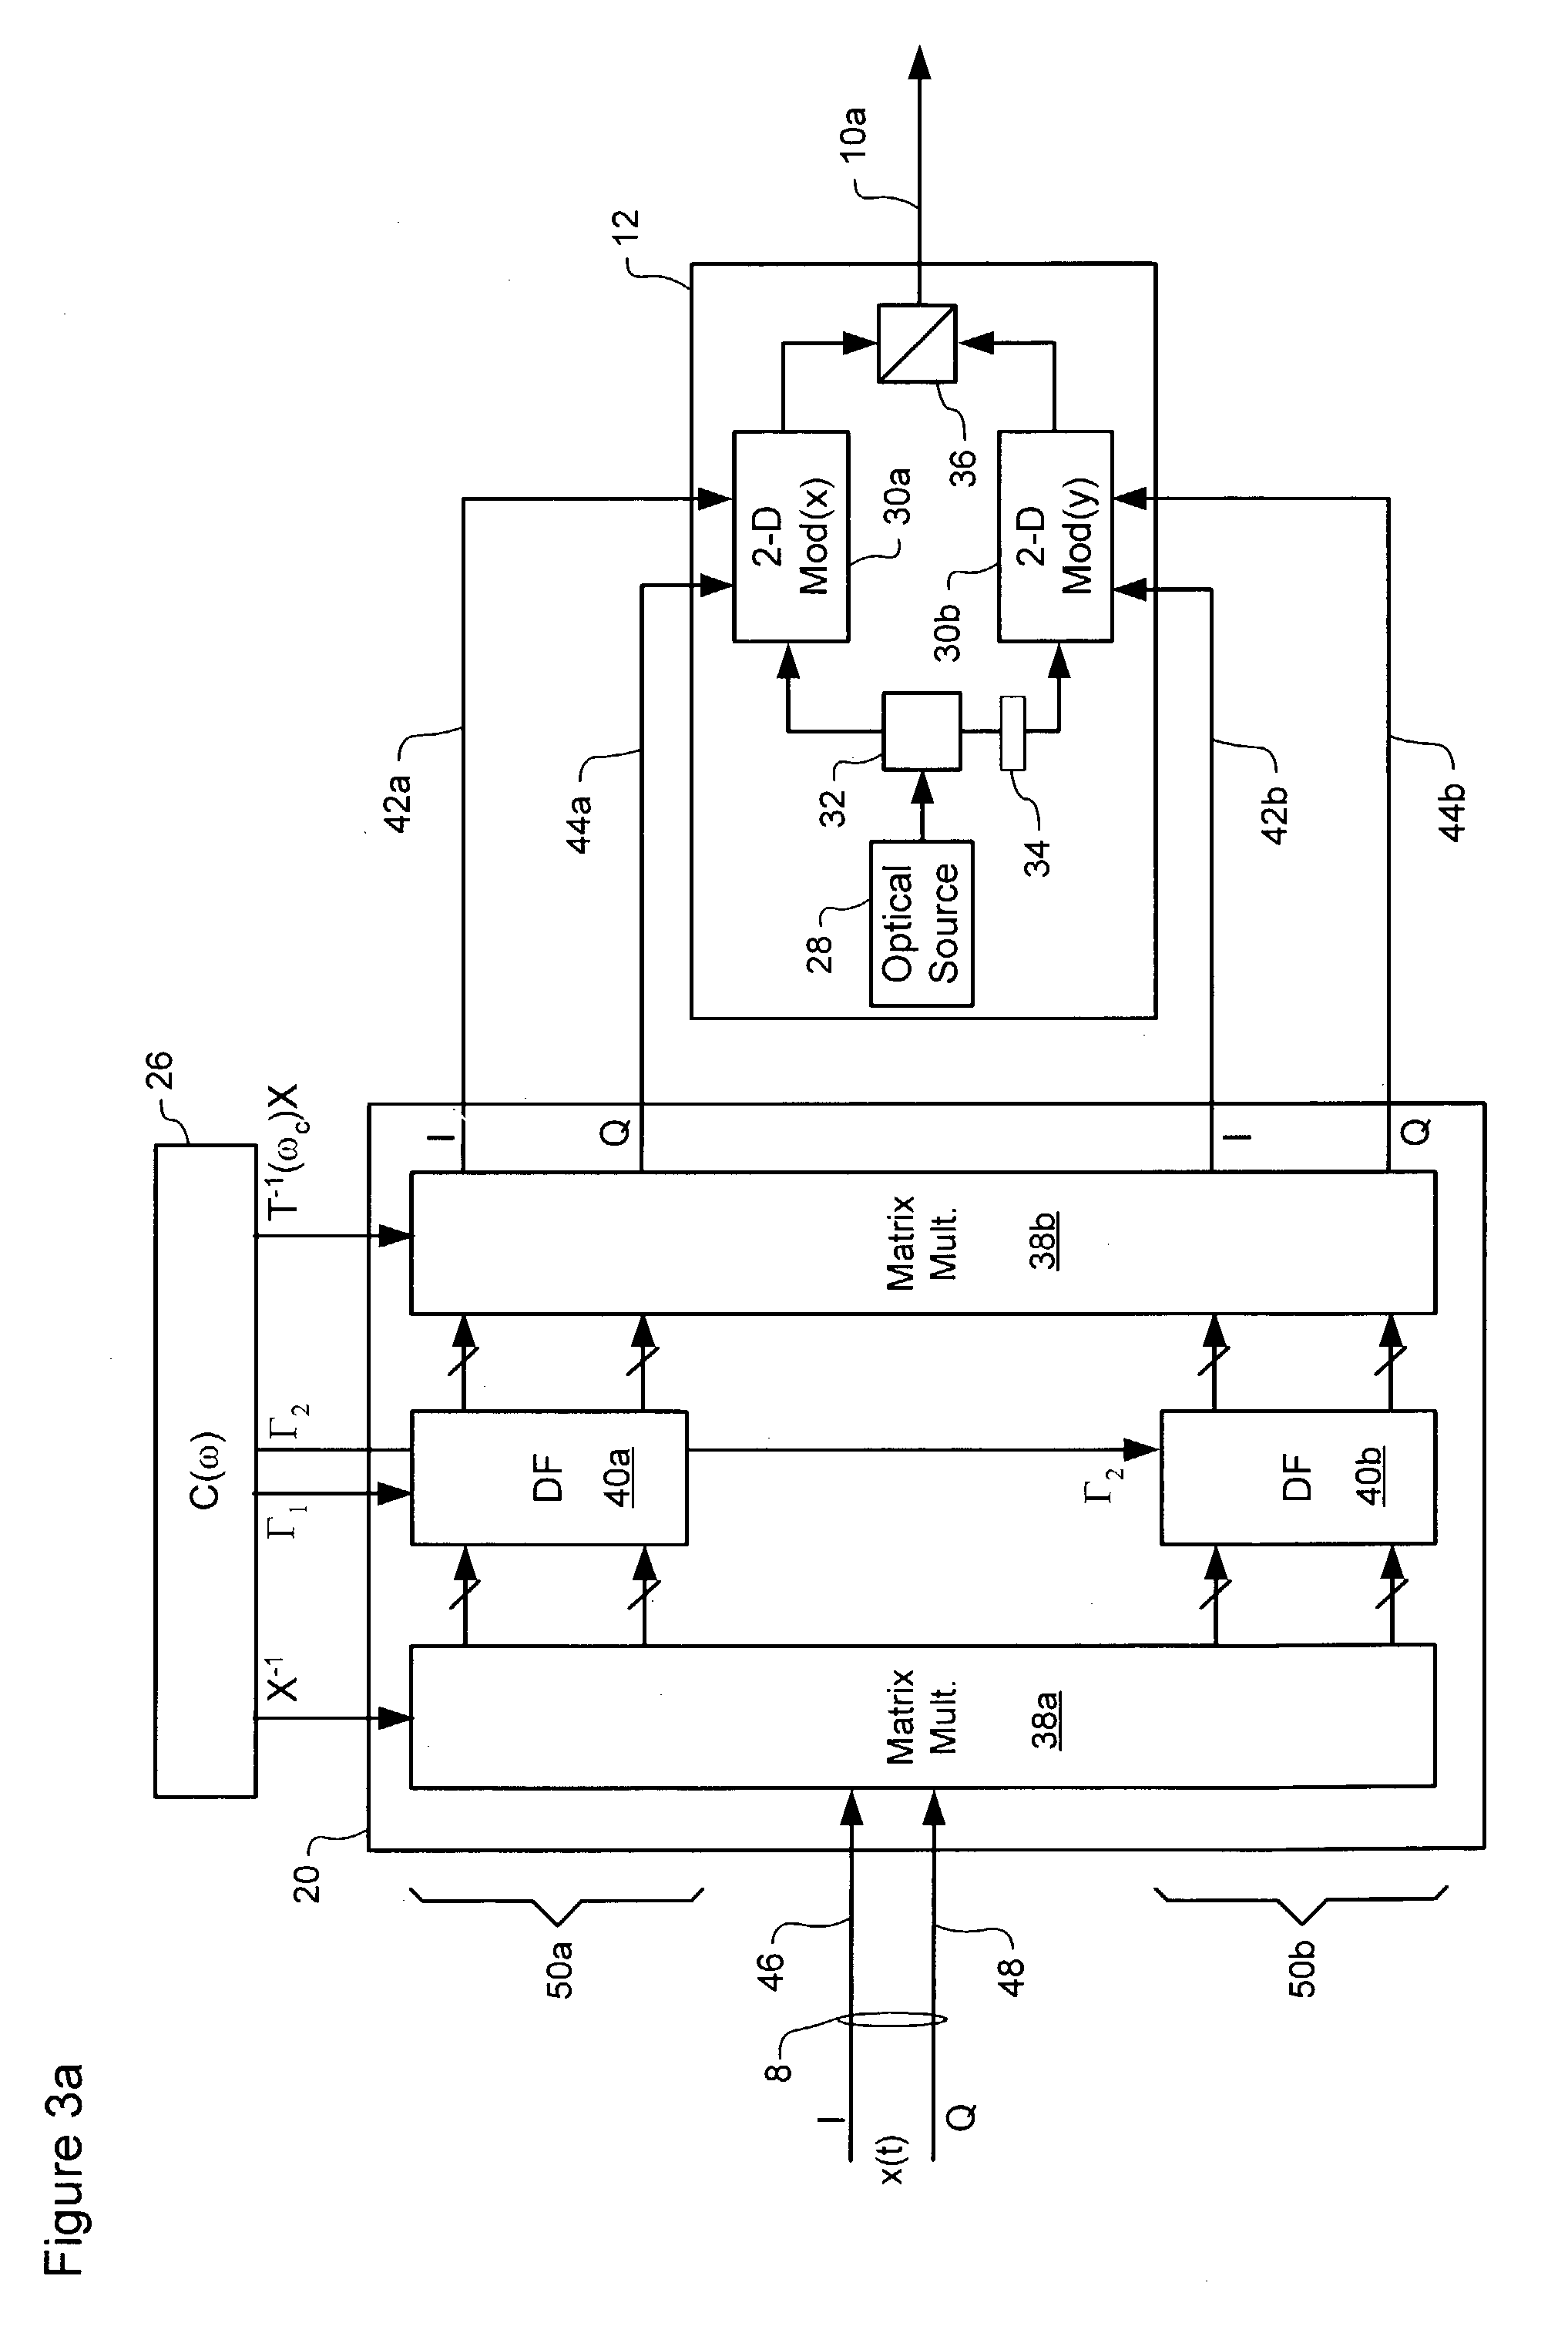 Electrical domain mitigation of polarization dependent effects in an optical communications system